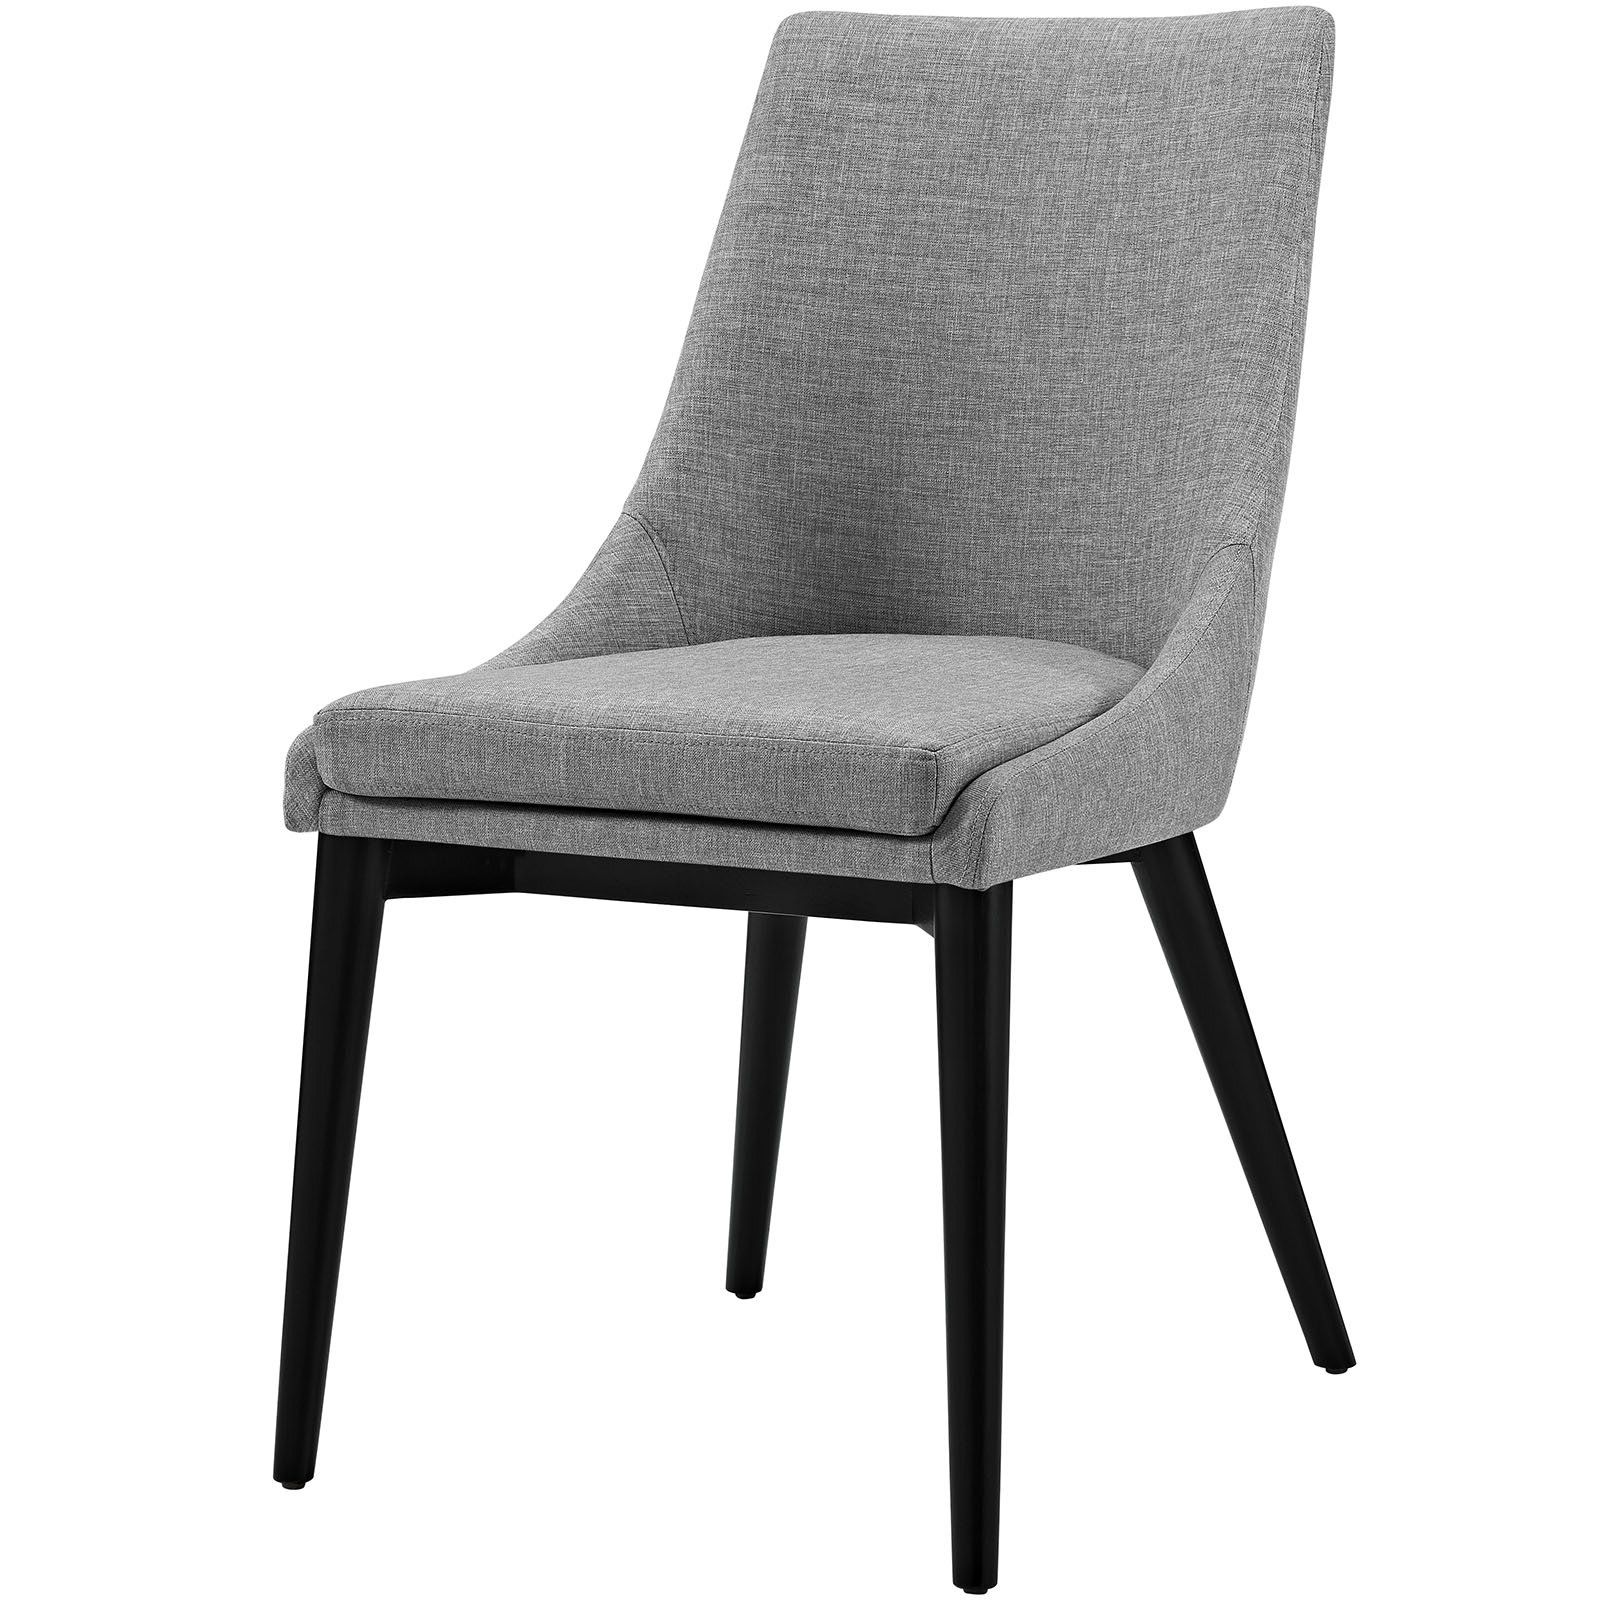 Carlton Wood Leg Upholstered Dining Chair In Most Recently Released Carlton Wood Leg Upholstered Dining Chairs (View 2 of 20)